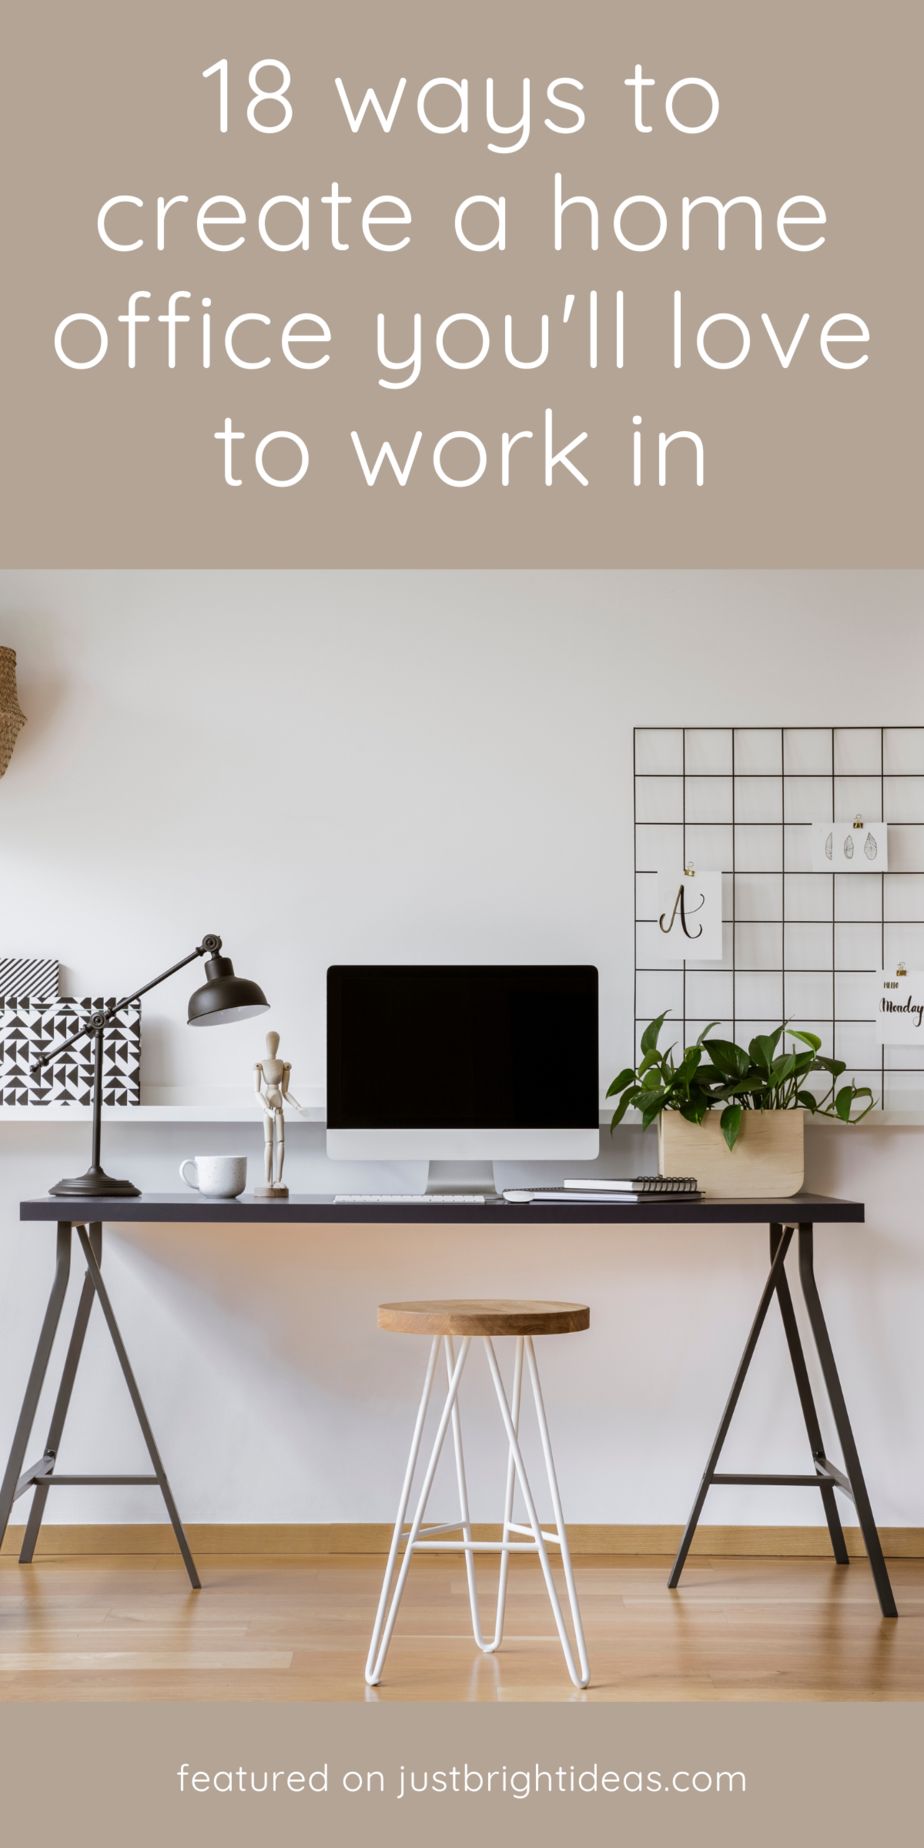 From cozy corners to organized desks, we've got 18 ways to make your home office work for you! 🪴📚 Get inspired and start creating your dream workspace today. 